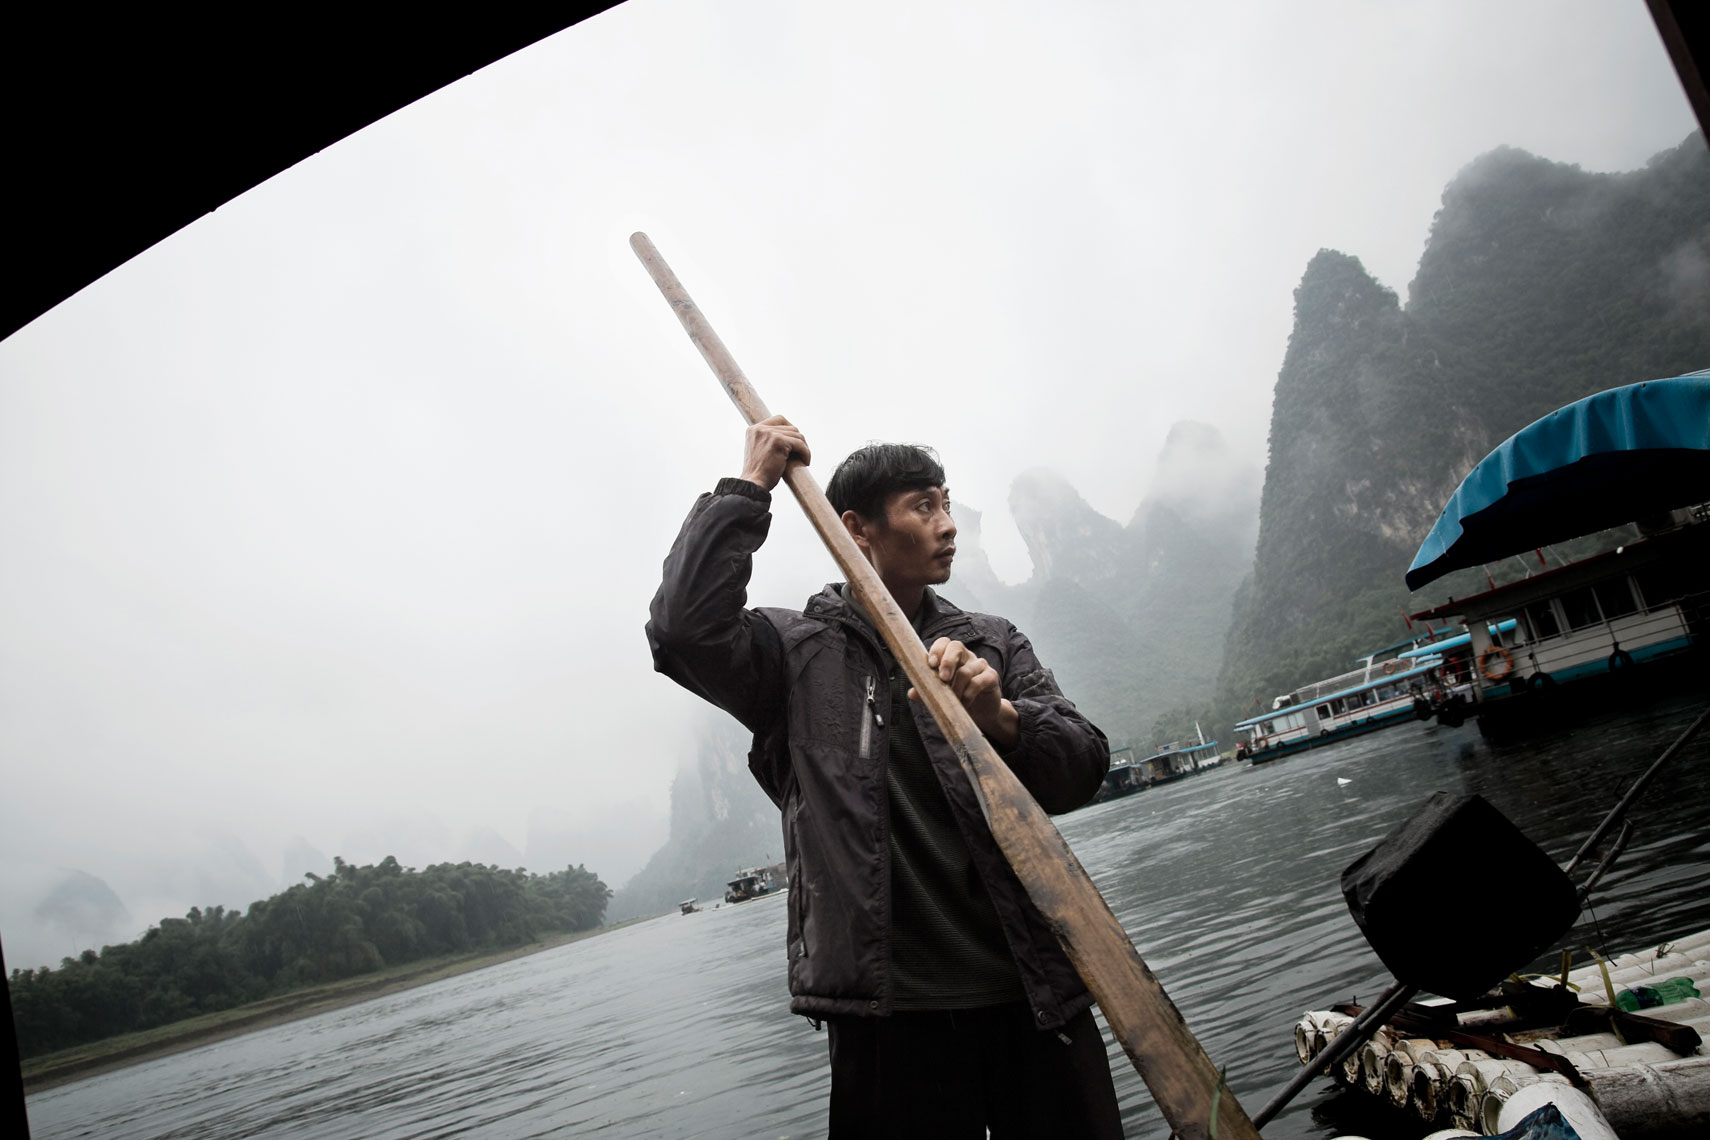 CHINA. Guangxi Province, September 2012. A man conduct a bamboo boat on the Li River.